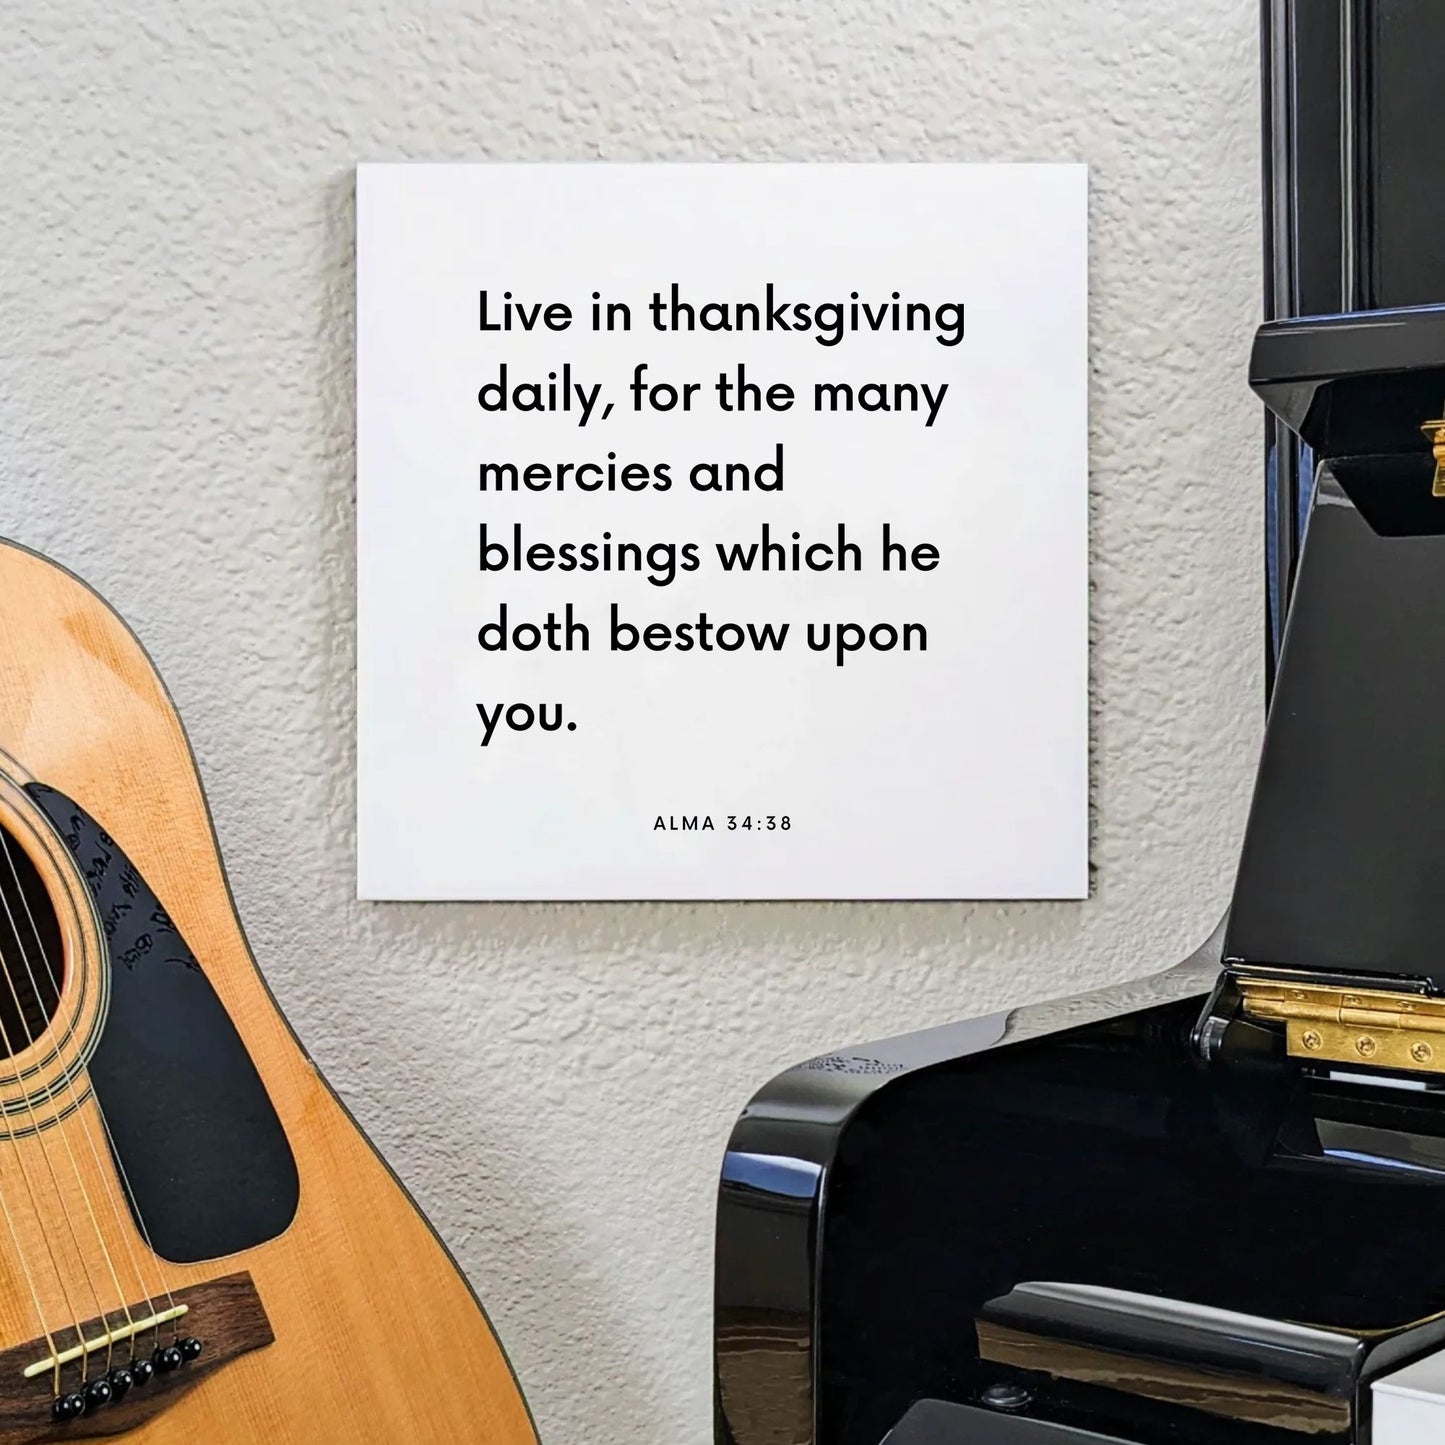 Music mouting of the scripture tile for Alma 34:38 - "Live in thanksgiving daily, for the many mercies"